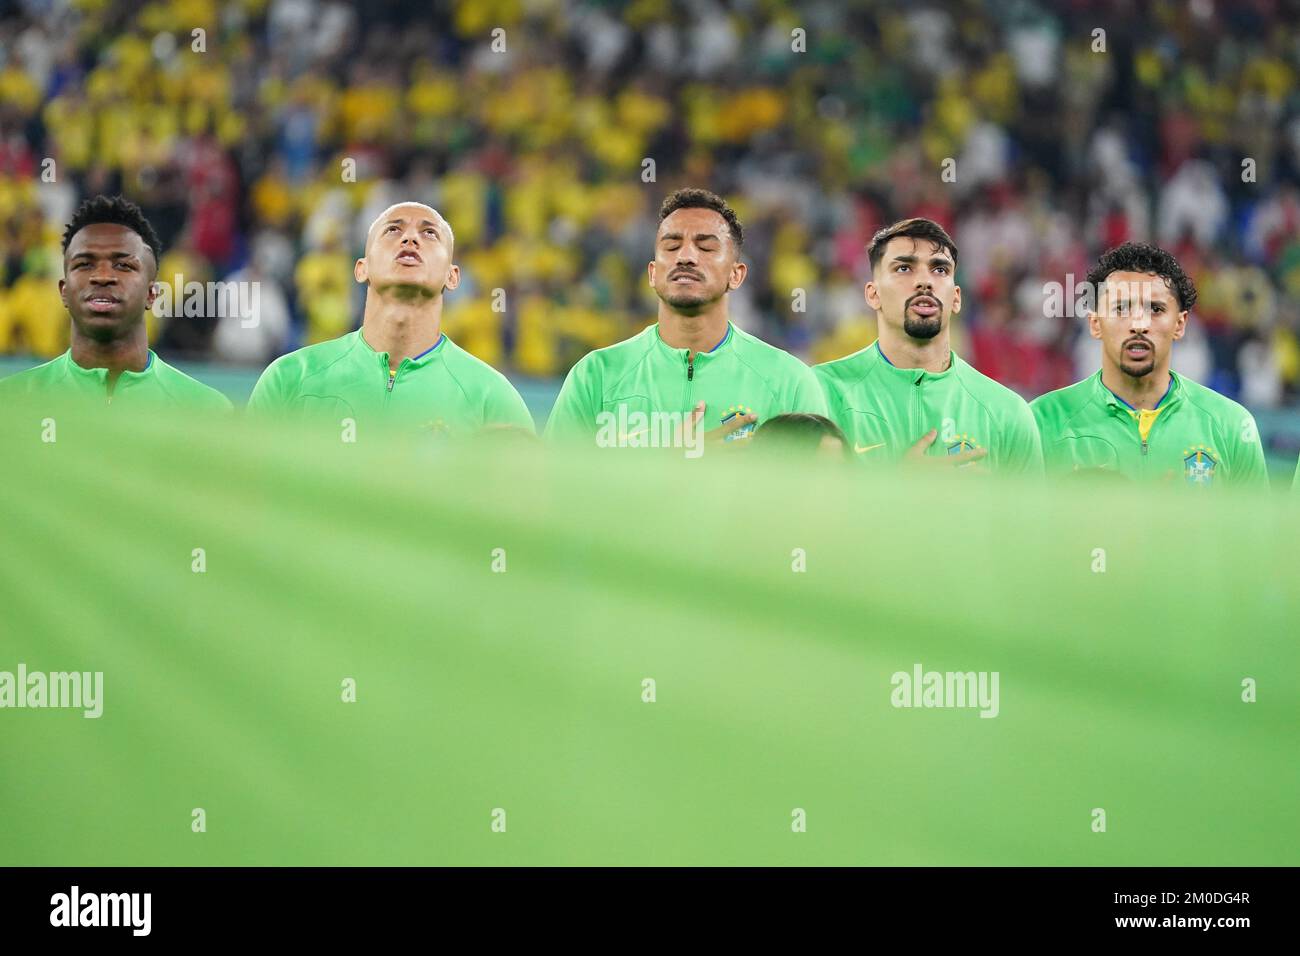 DOHA, QATAR - DECEMBER 5: Players of Brazil Vinícius Júnior, Richarlison, Danilo, Lucas Paquetá and Marquinhos sing the national anthem before the FIFA World Cup Qatar 2022 Round of 16 match between Brazil and South Korea at Stadium 974 on December 5, 2022 in Doha, Qatar. (Photo by Florencia Tan Jun/PxImages) Stock Photo